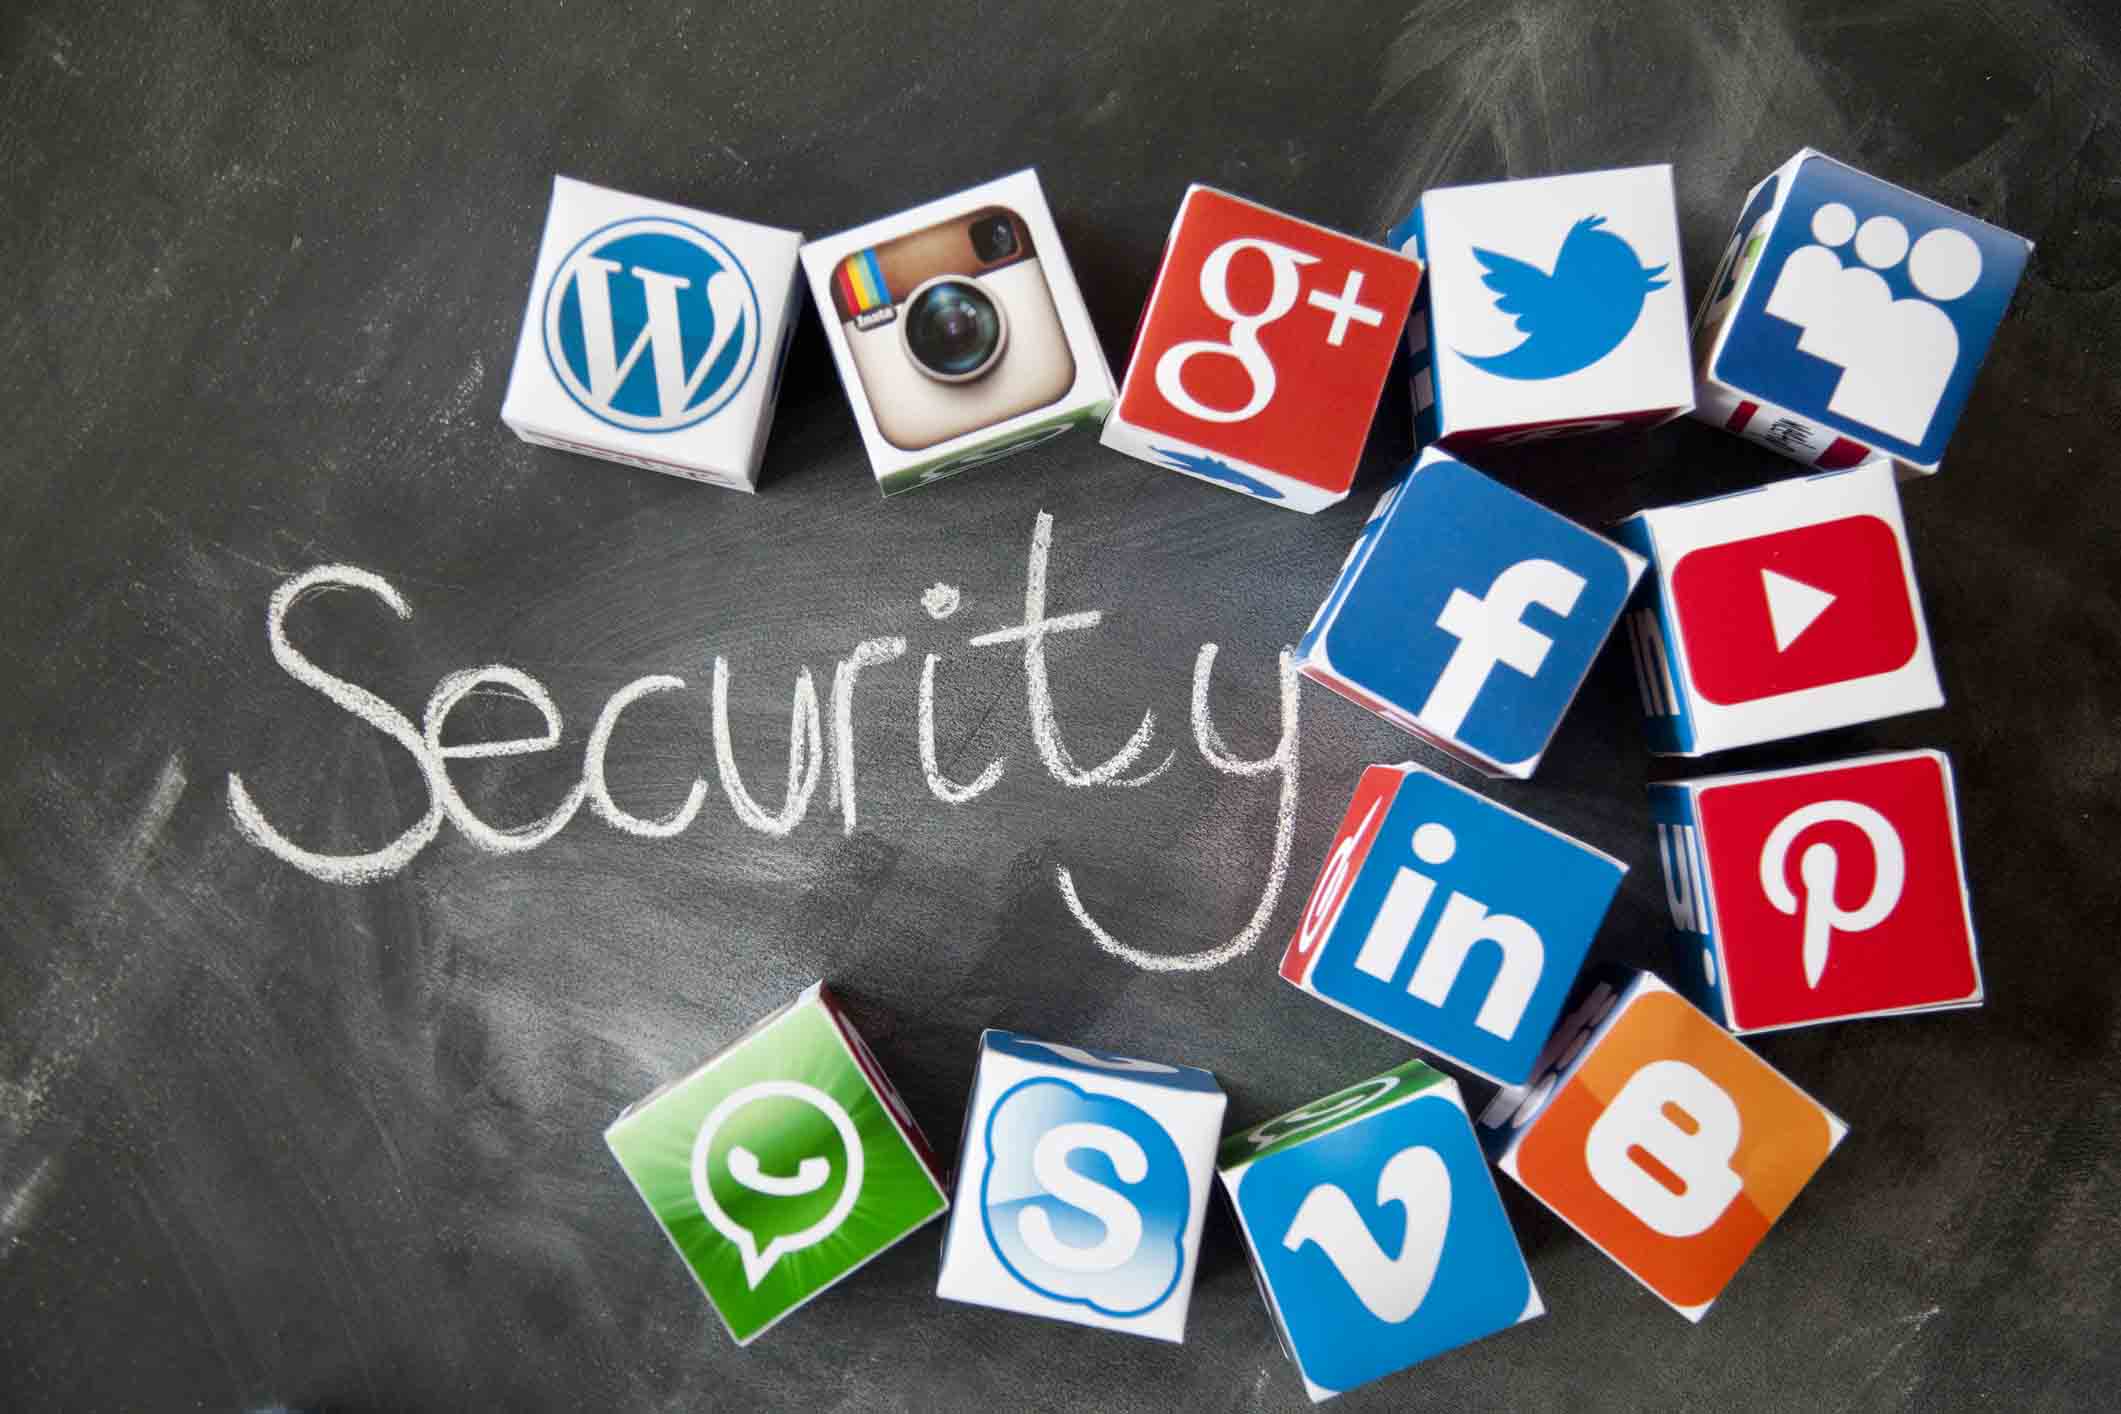 Introduction to Social Network and Its Security Issues